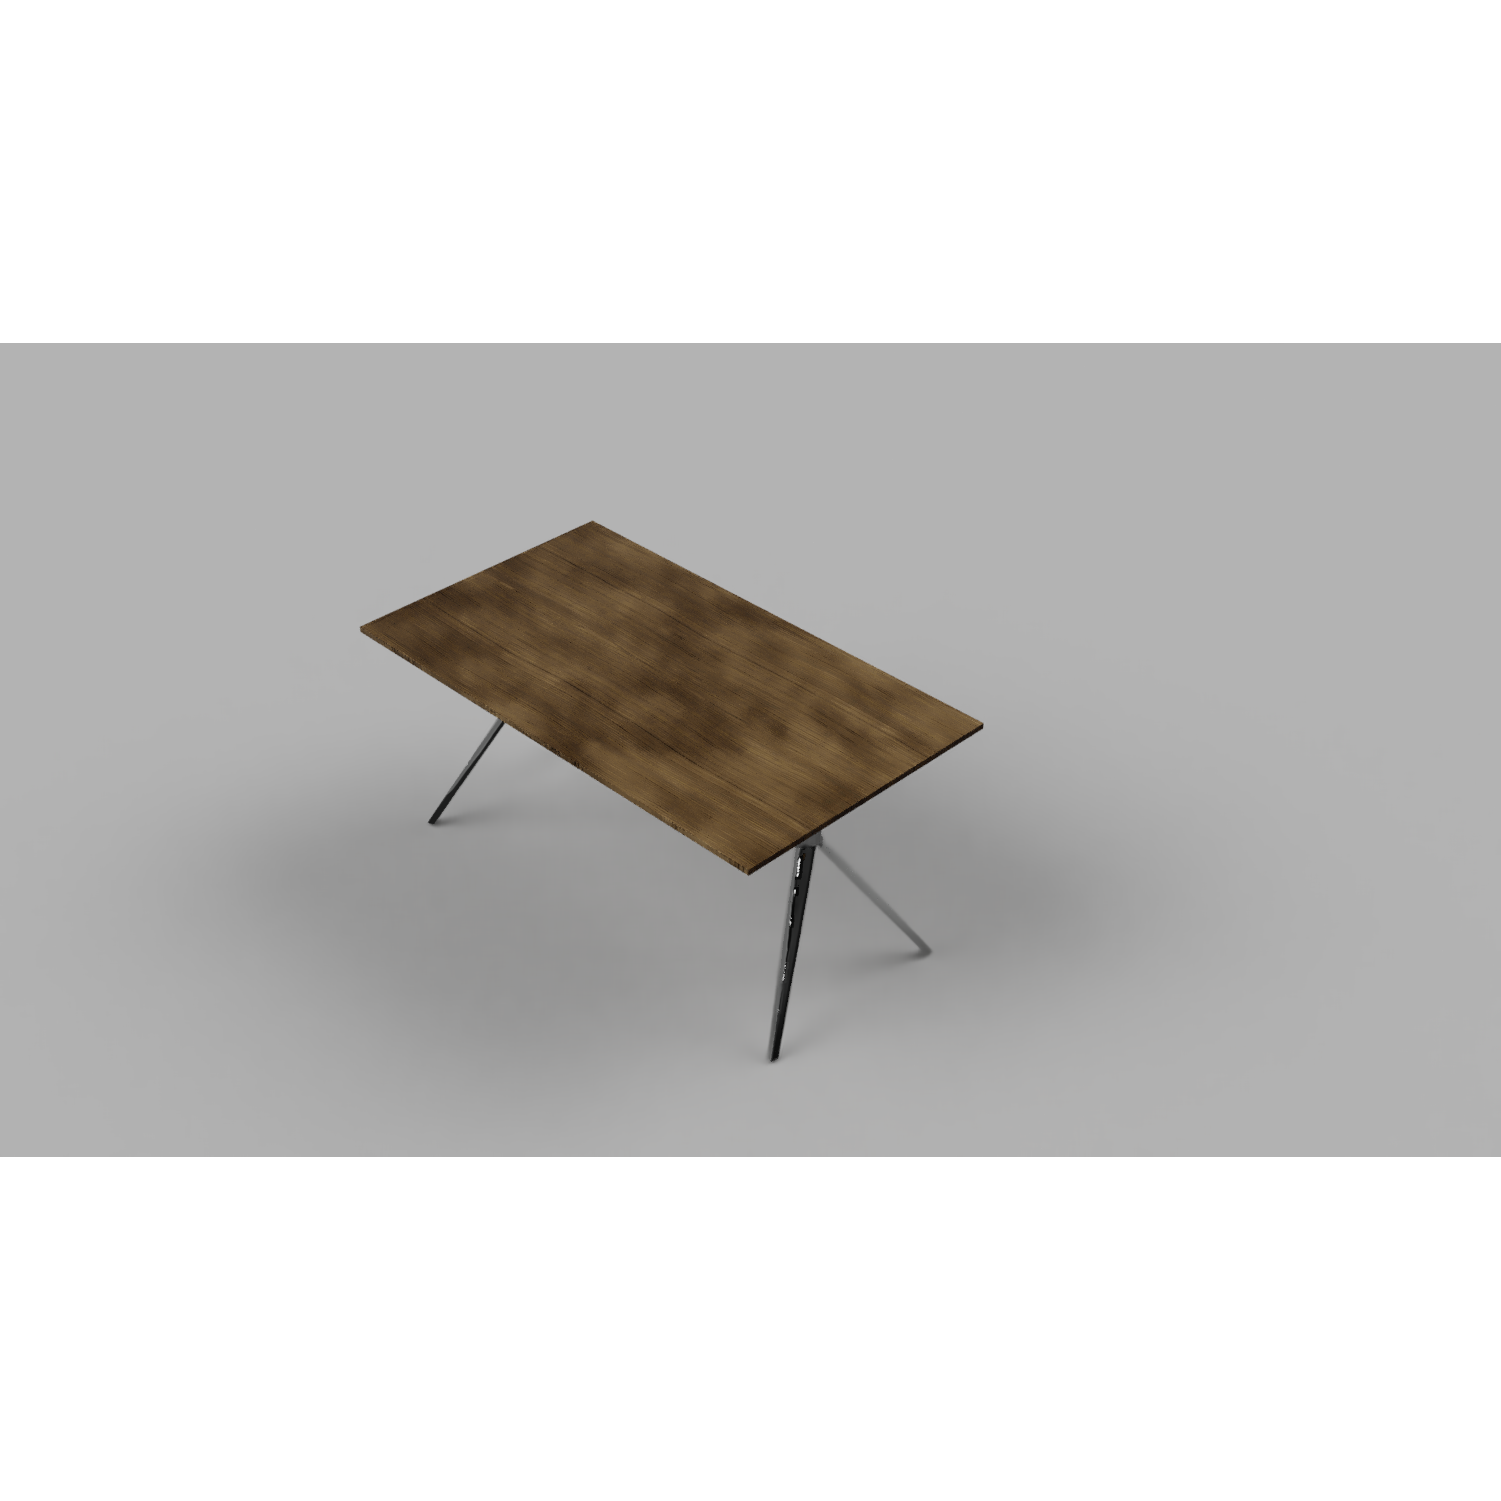 Lexington Cabin Table - Free Standing